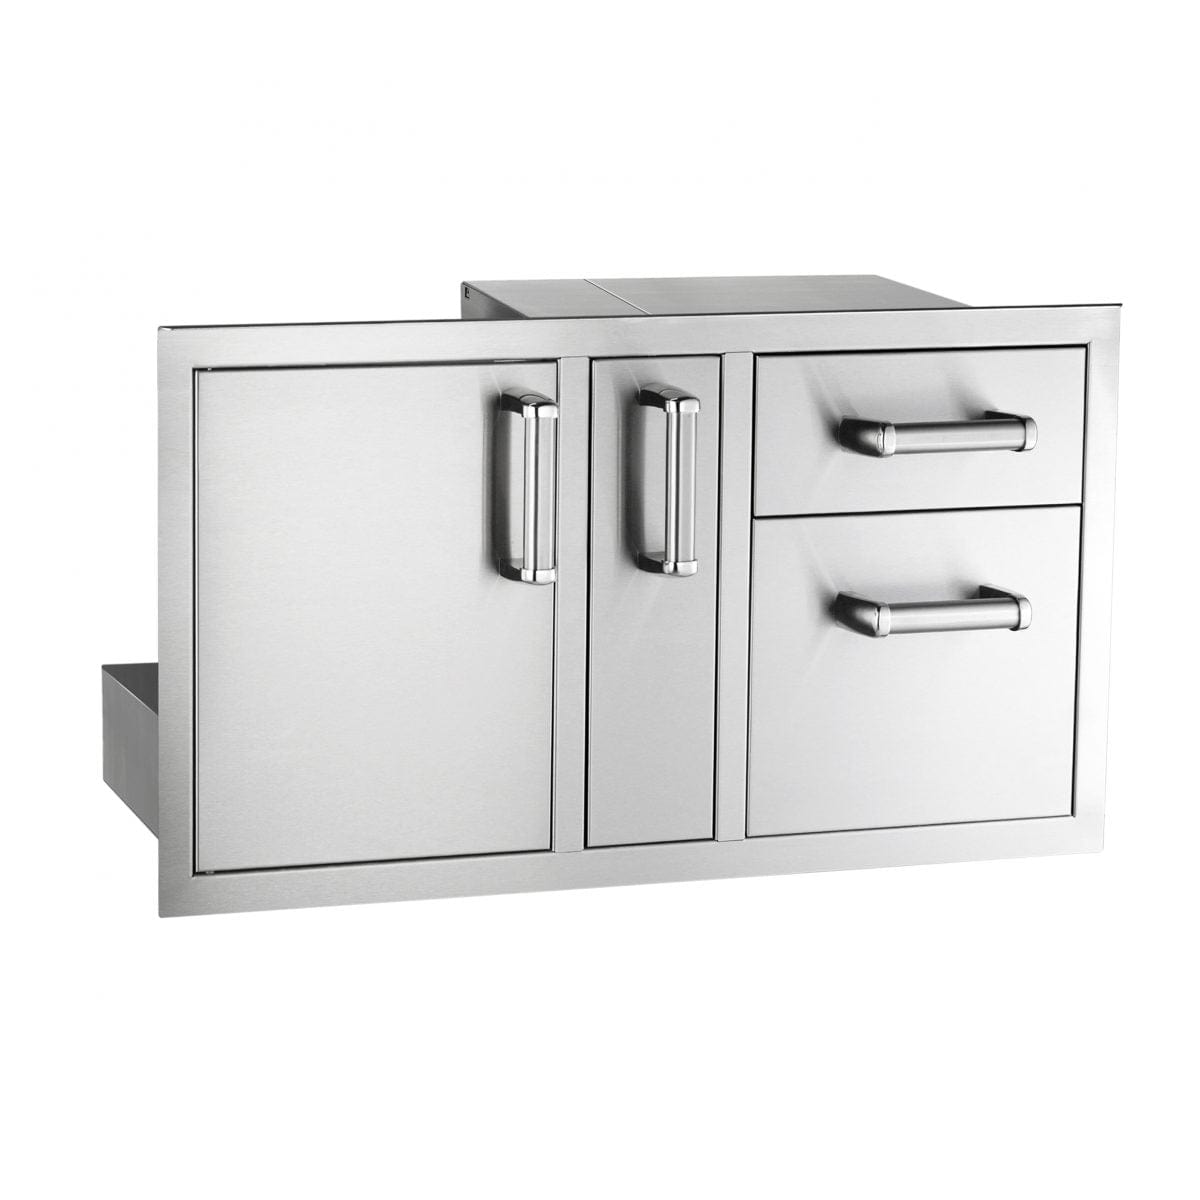 Fire Magic Flush Door/Drawer Combo with Platter Storage - Kitchen King Direct